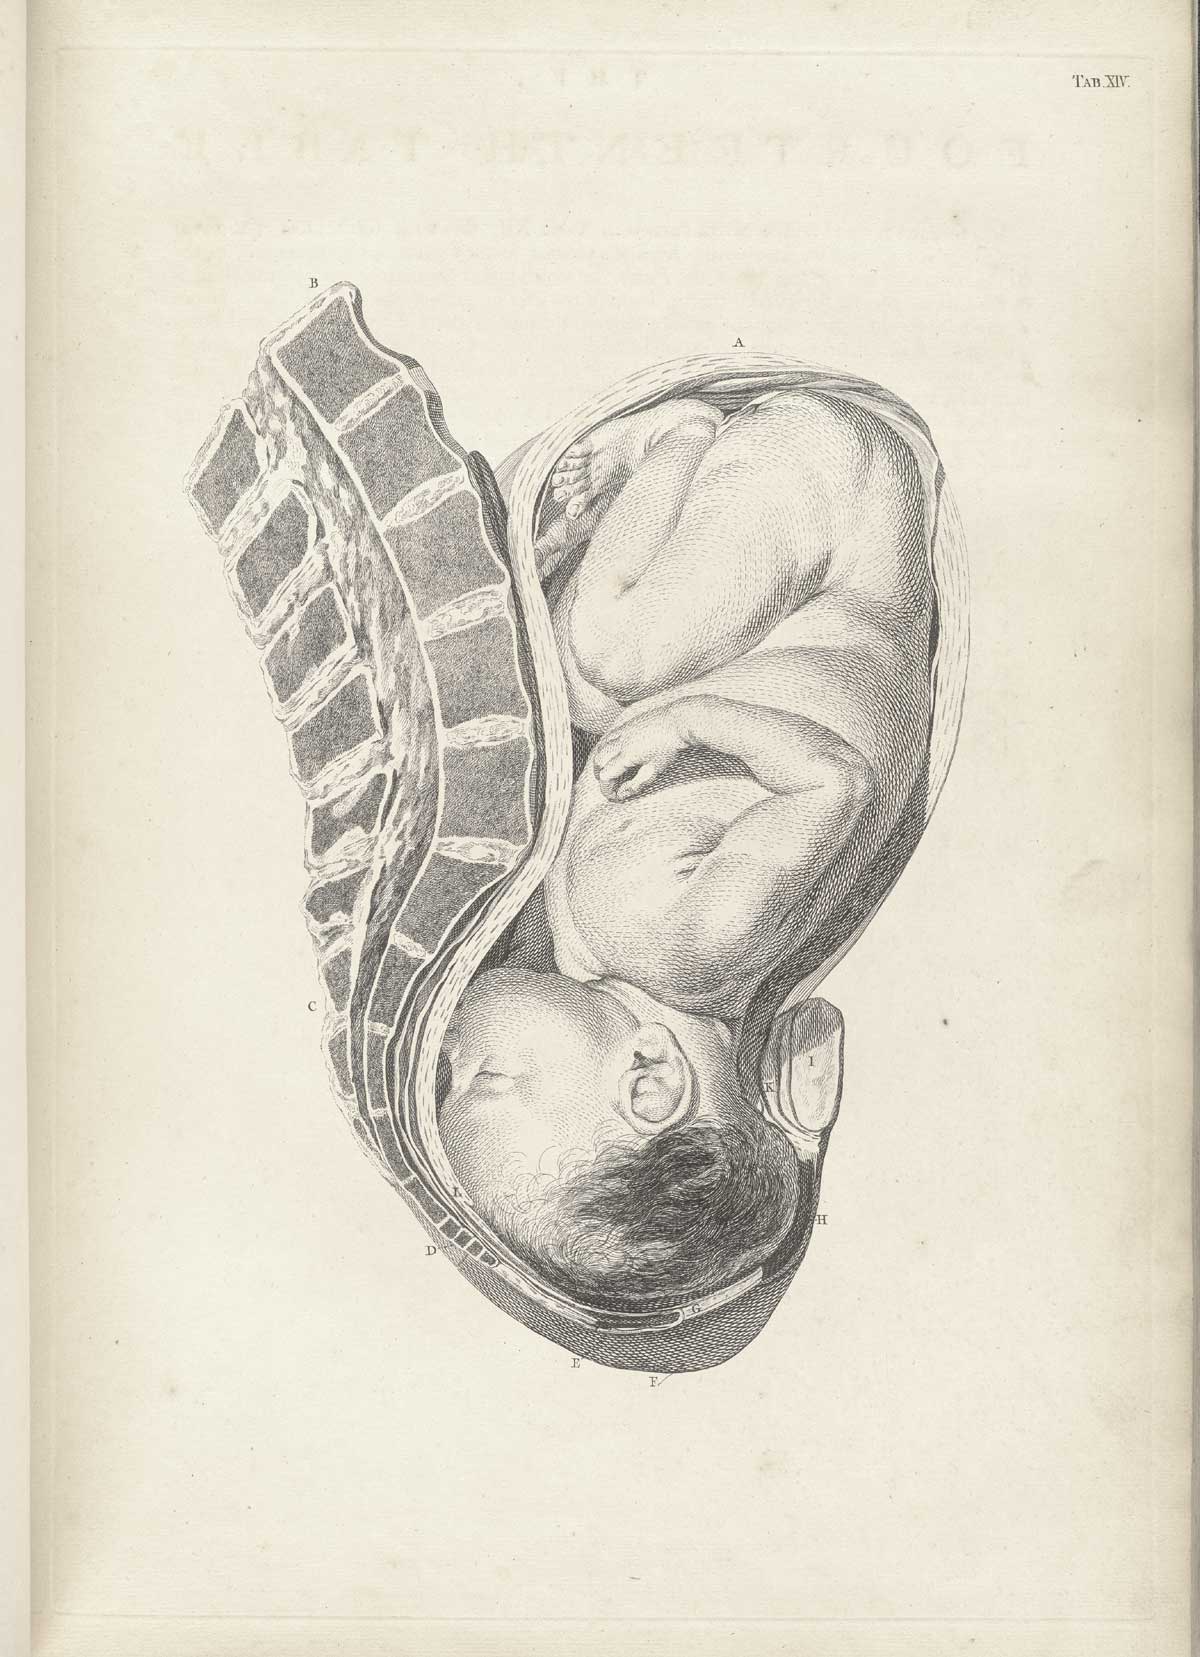 Table 14 of William Smellie's A sett of anatomical tables, with explanations, and an abridgment, of the practice of midwifery, featuring the illustrated drawing of a woman's uterus with a fetus resting against the spine.